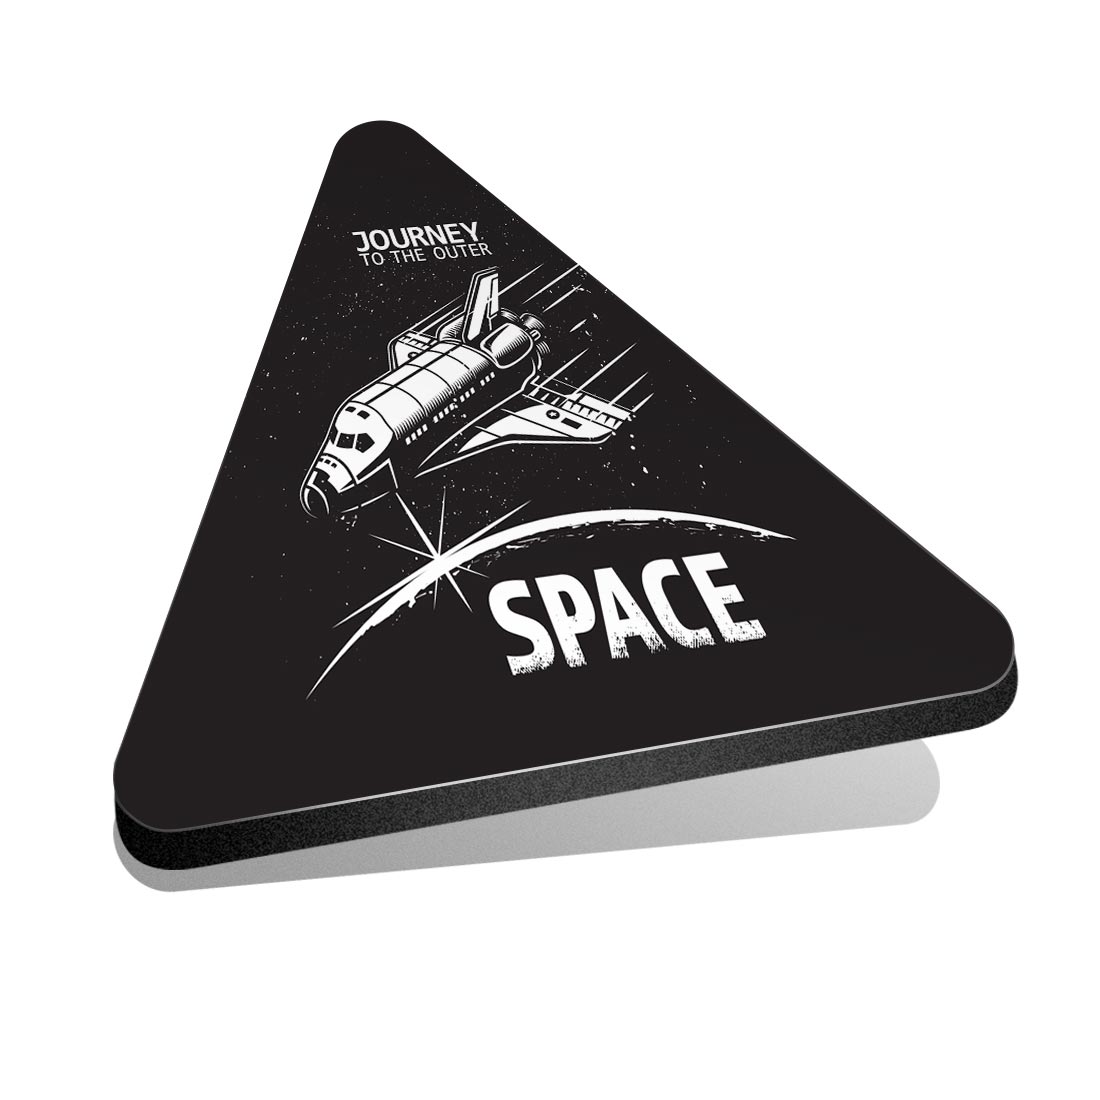 1x Triangle Fridge MDF Magnet Journey Outer Space Rocket Ship #63175 - Picture 1 of 1